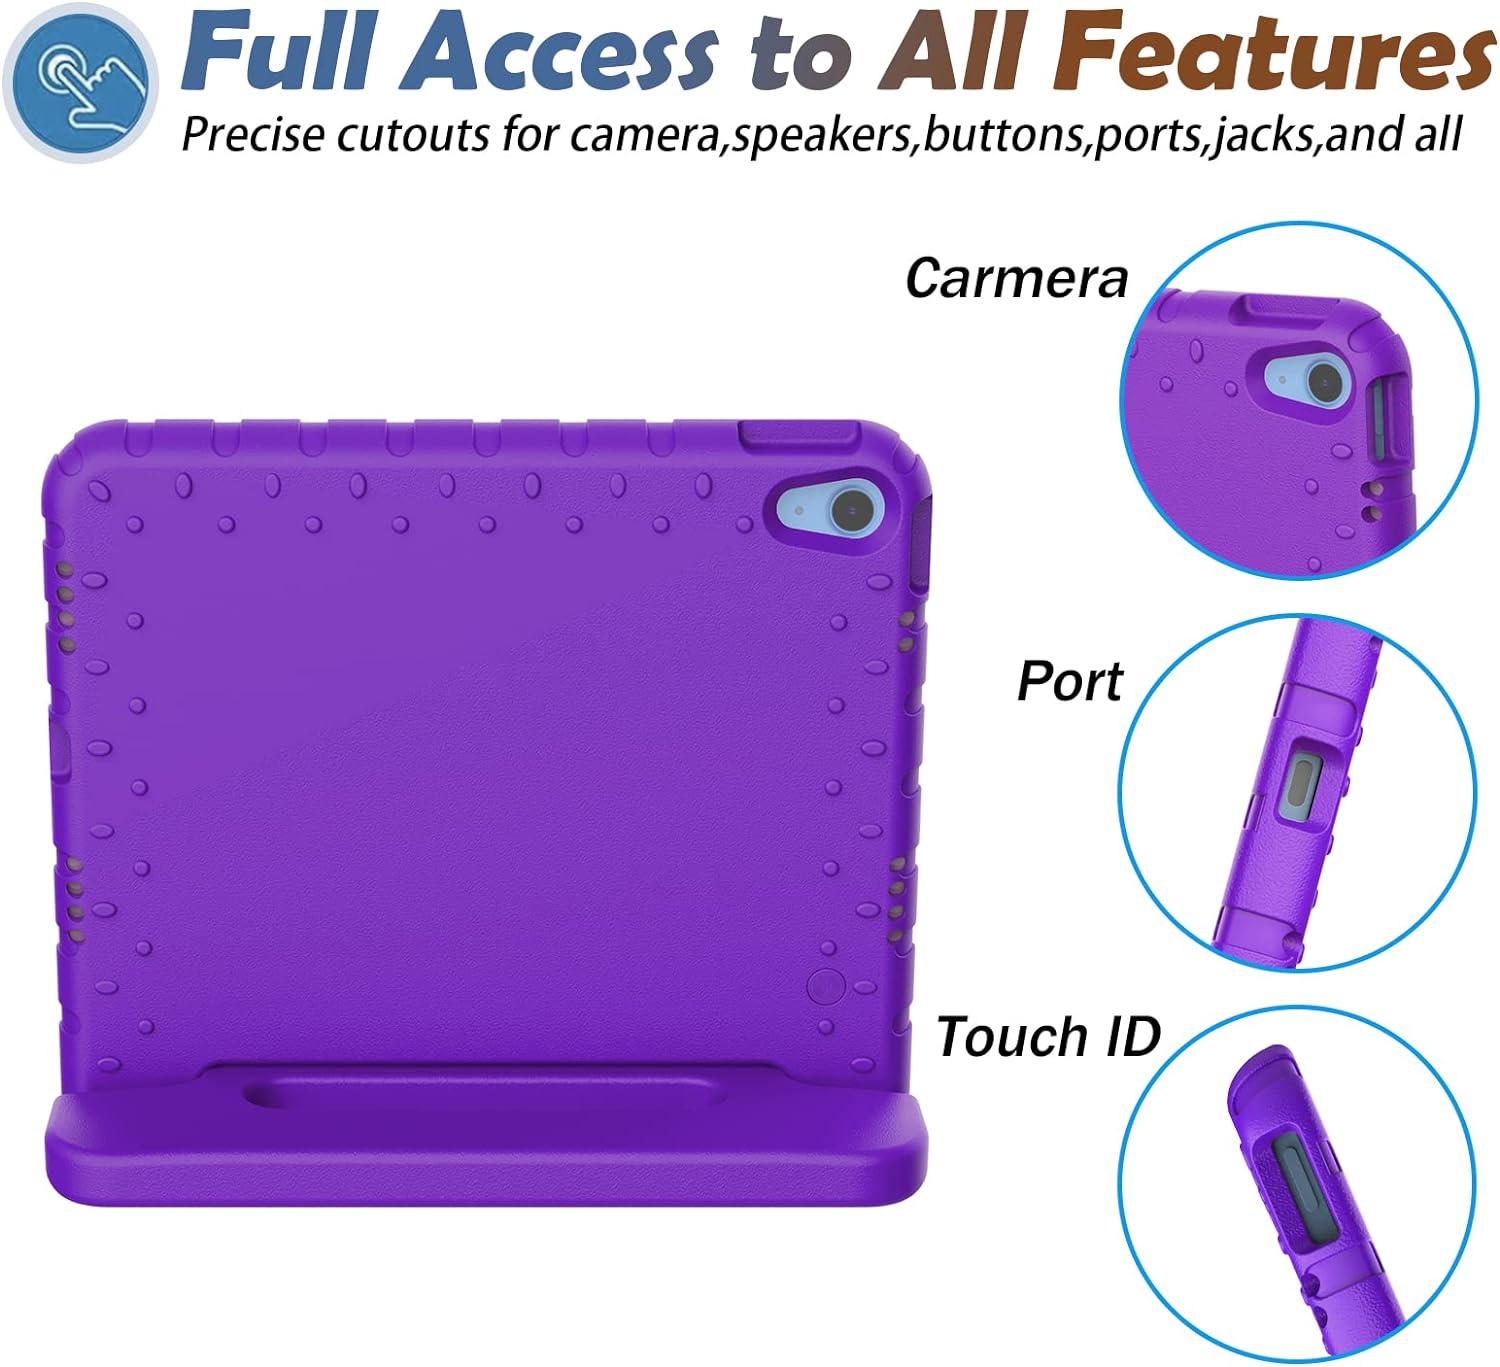 iPad 9.7 inch Shockproof Case w Handle & Stand (Purple) *Free Shipping*